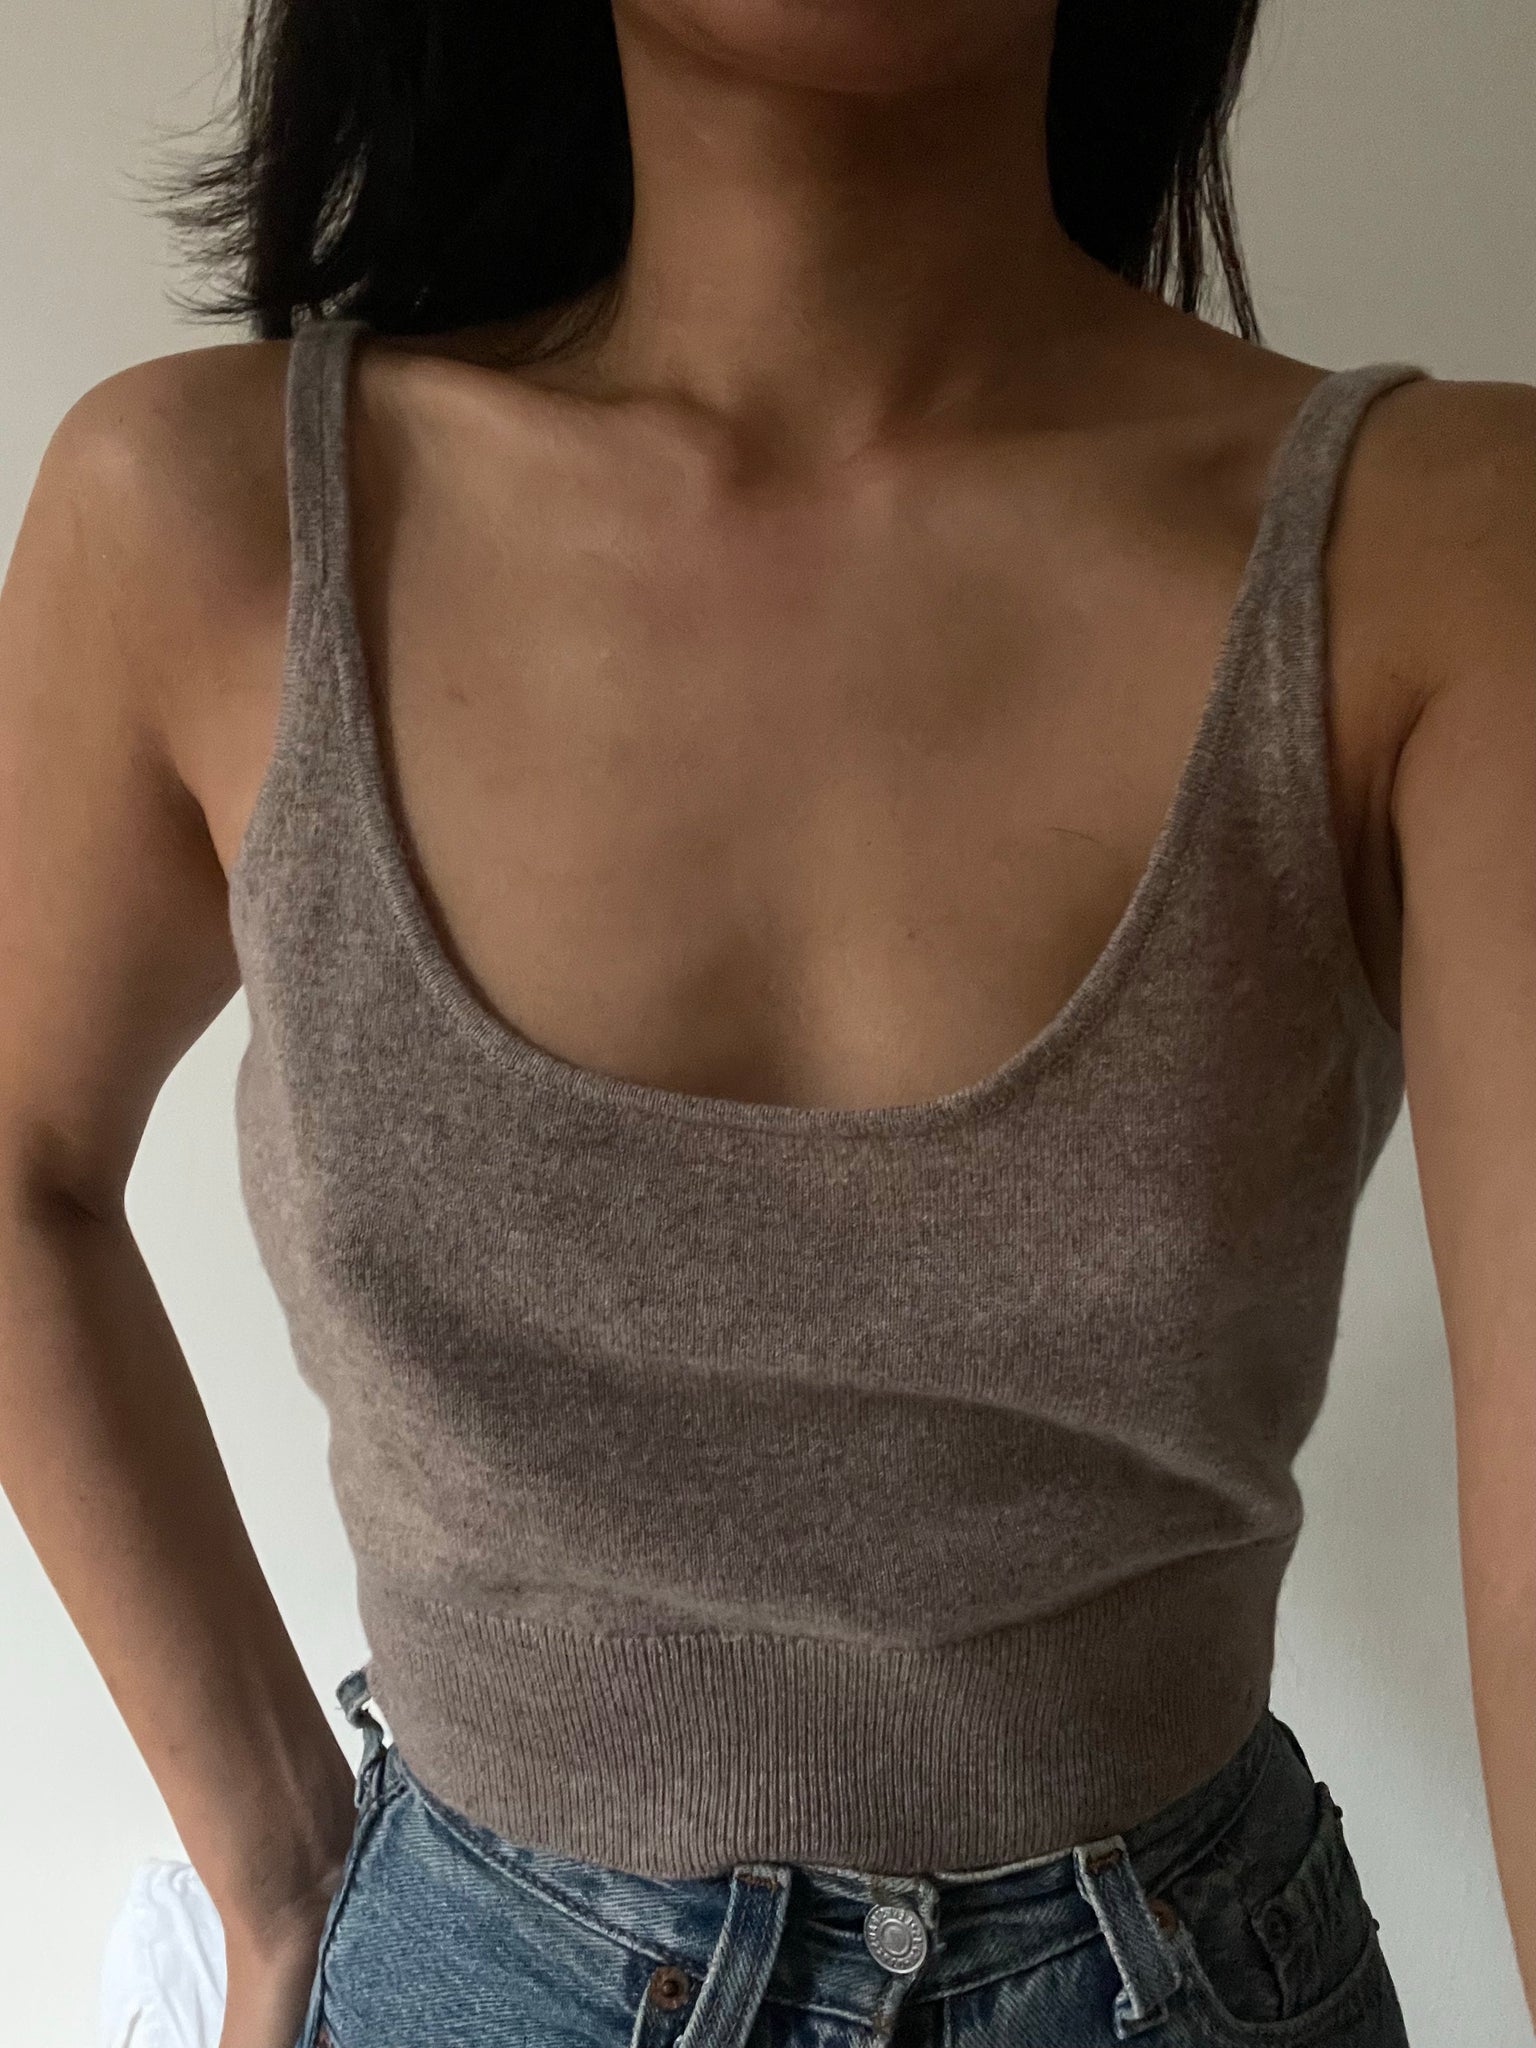 HONORE CASHMERE TANK IN BISCUIT